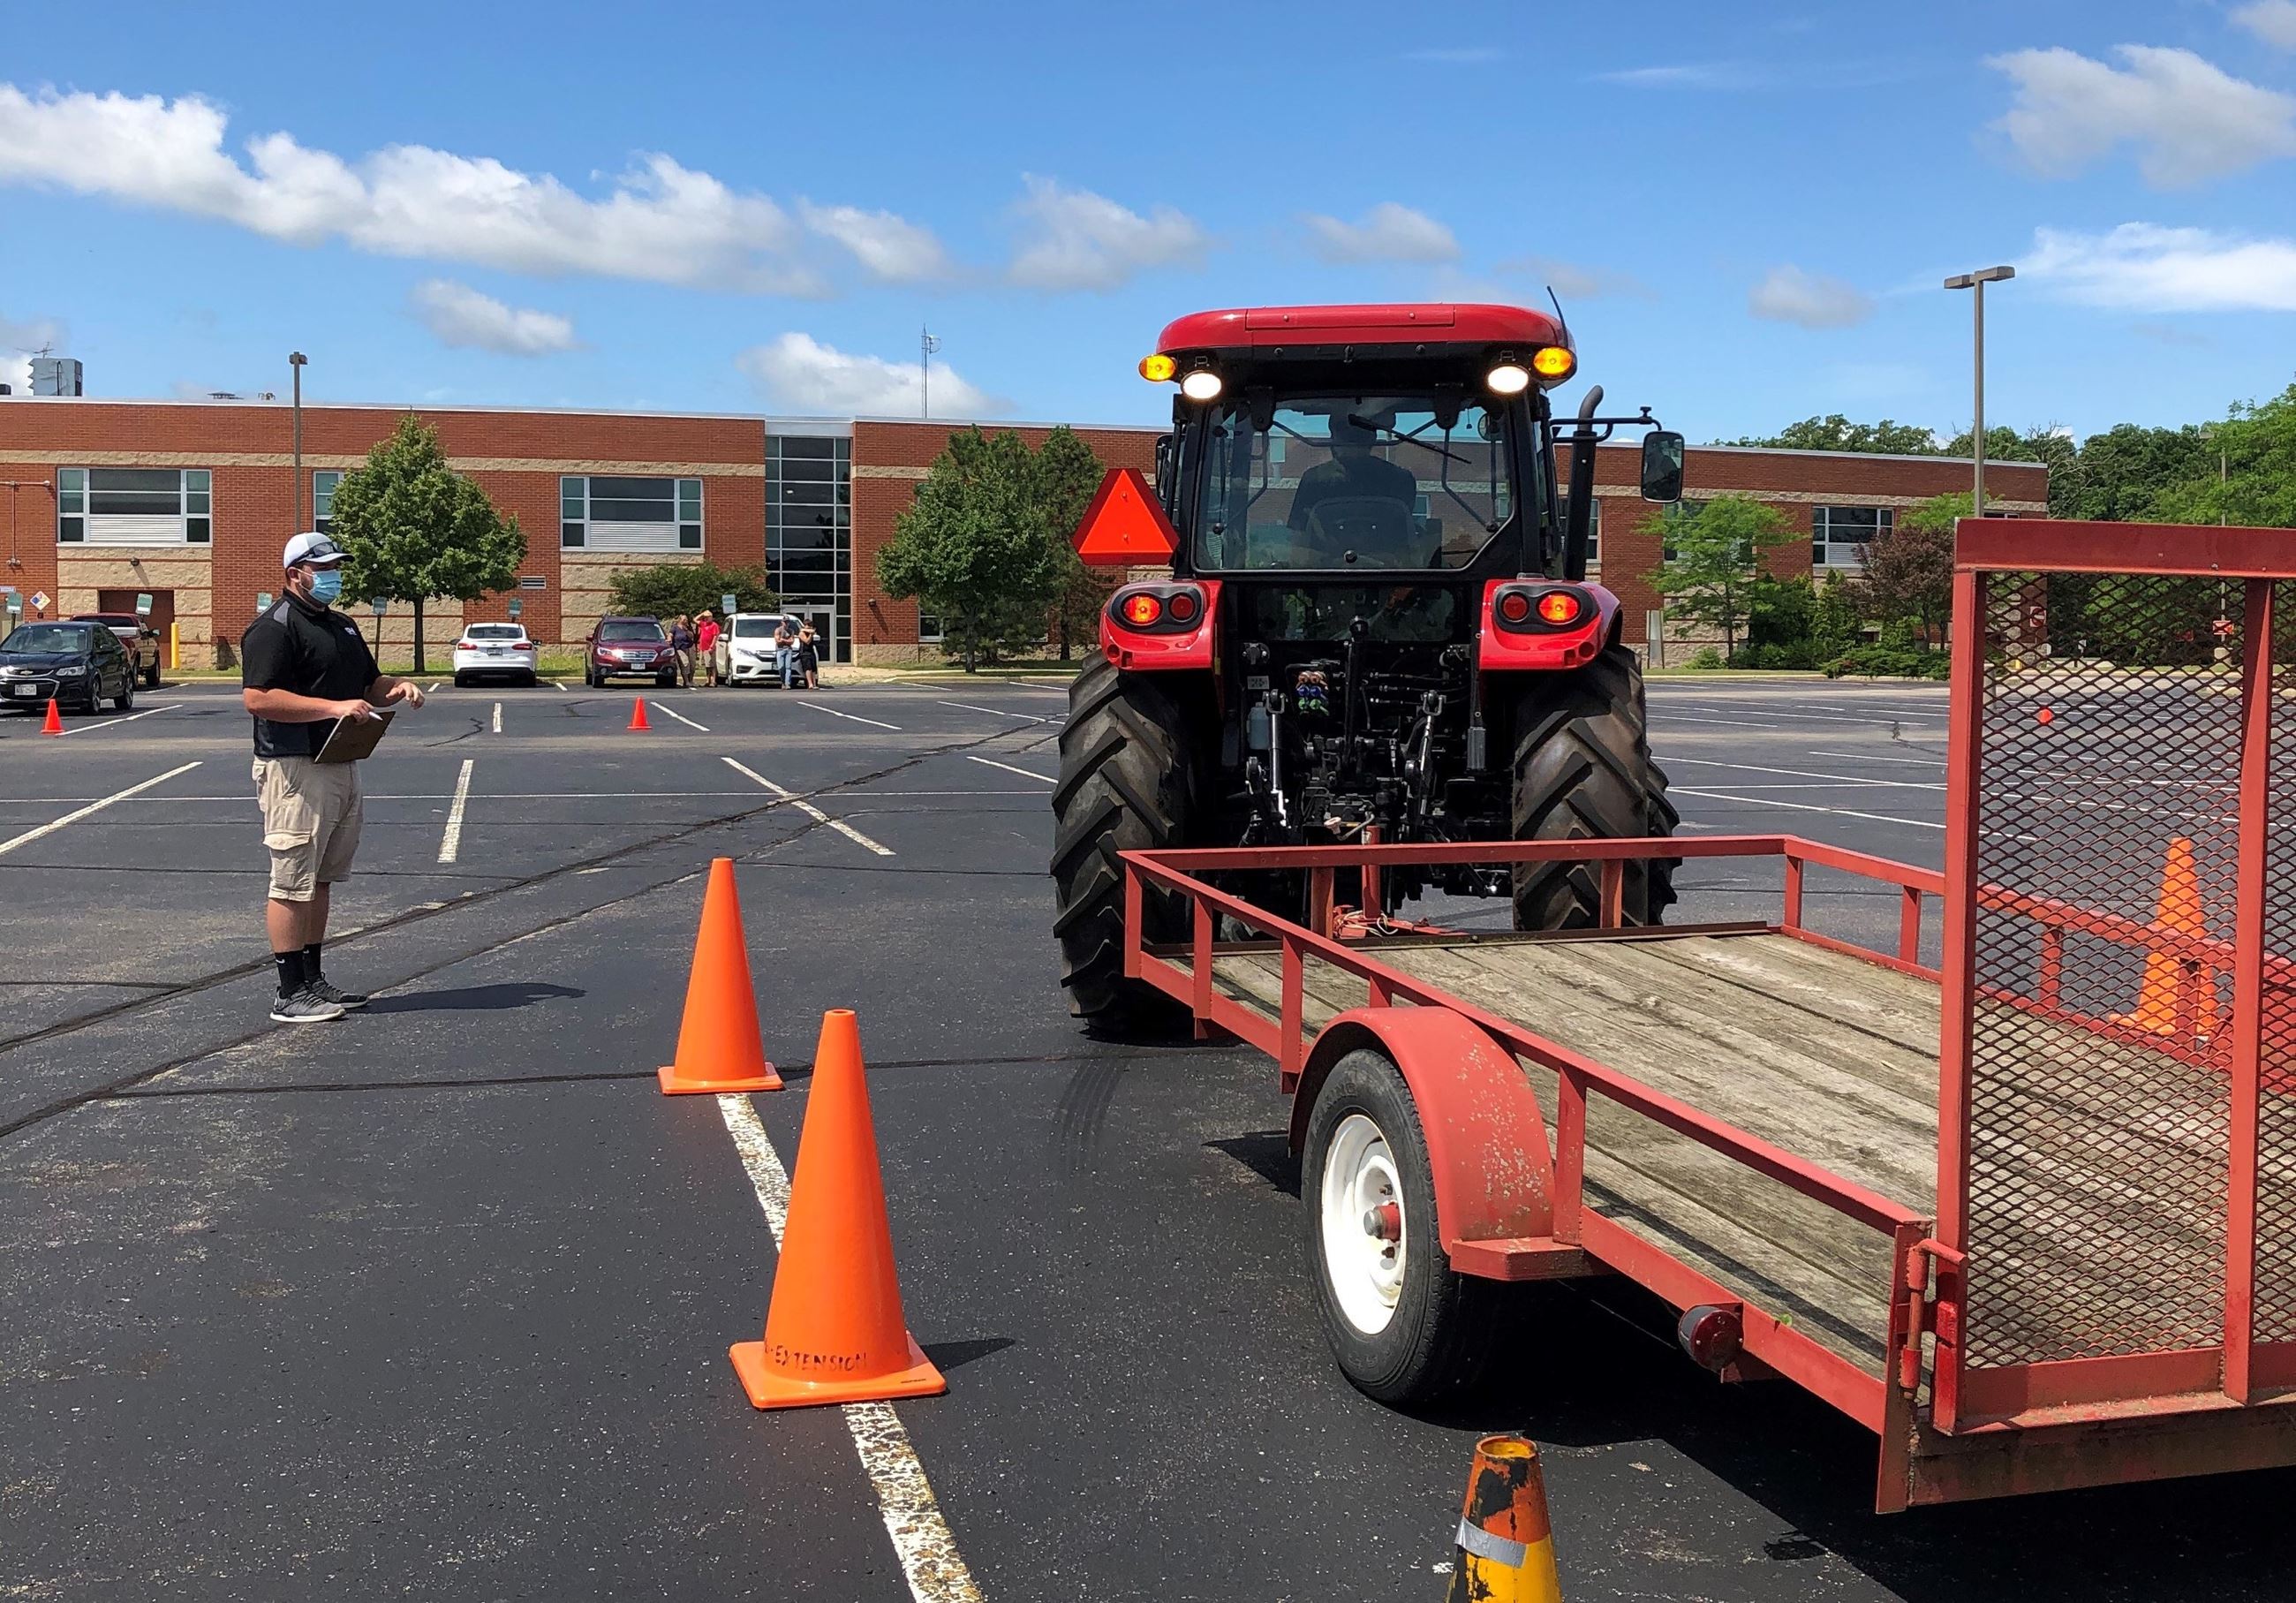 2020 Tractor Safety Program participation